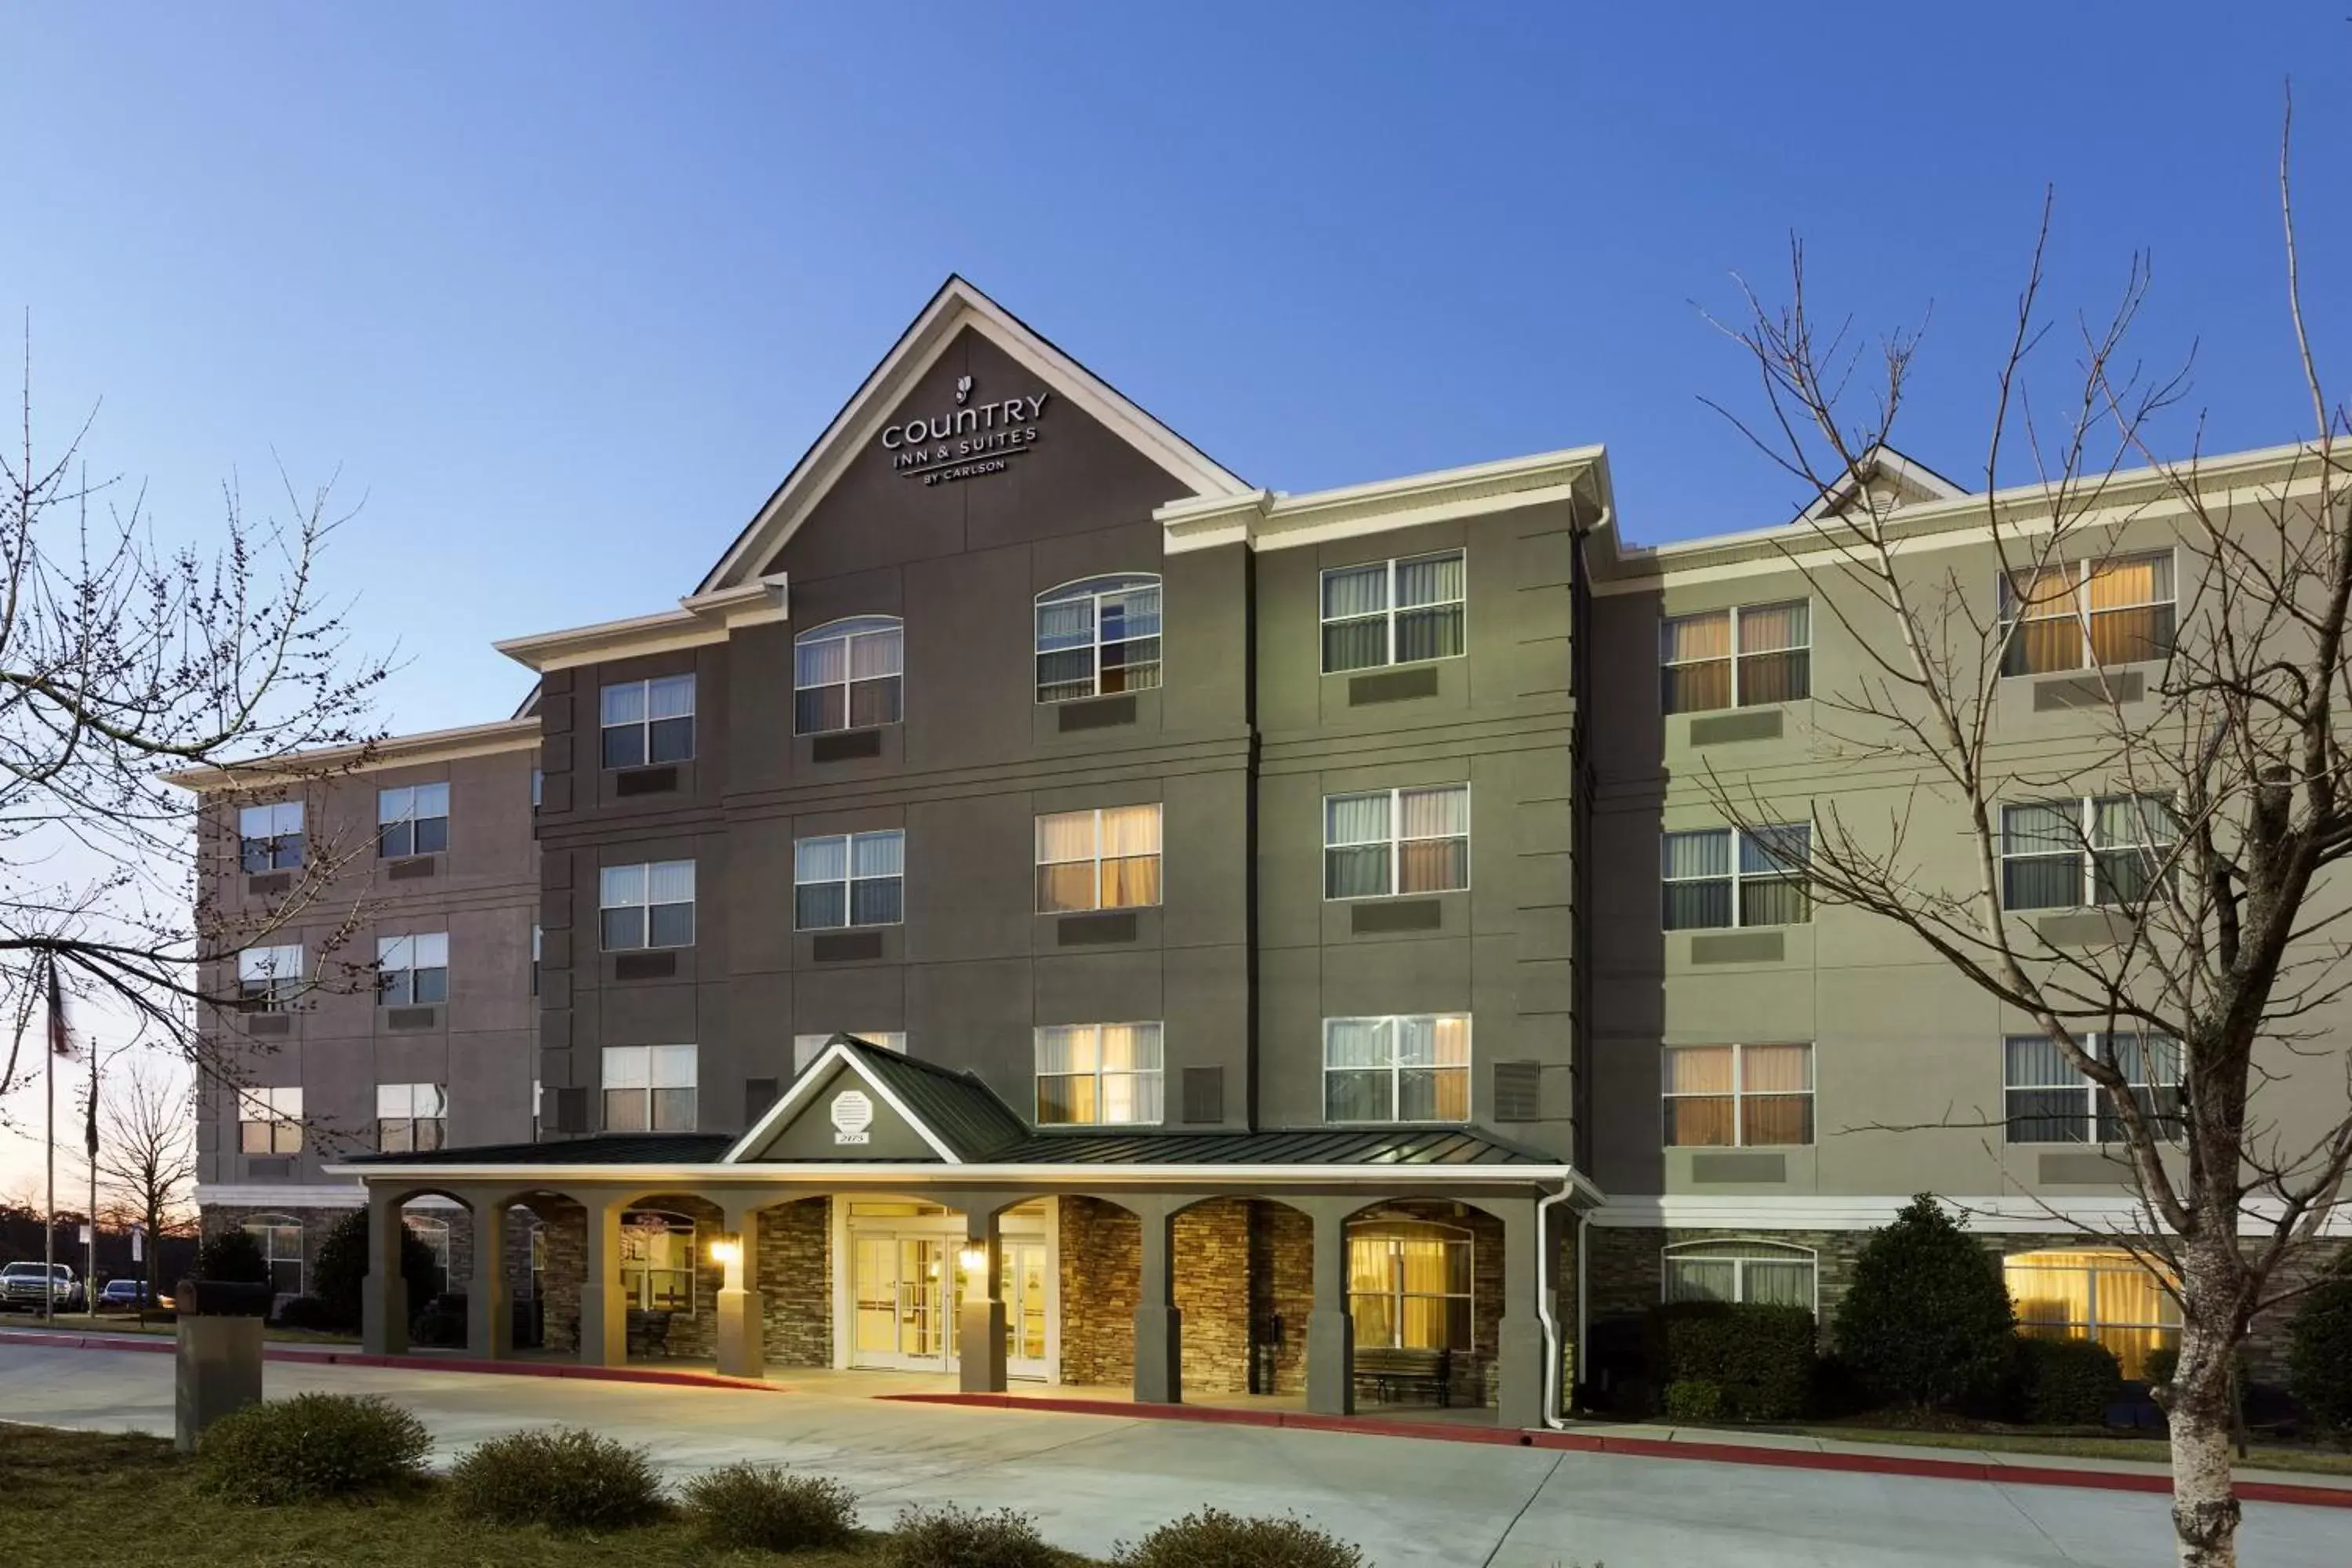 Facade/entrance, Property Building in Country Inn & Suites by Radisson, Smyrna, GA